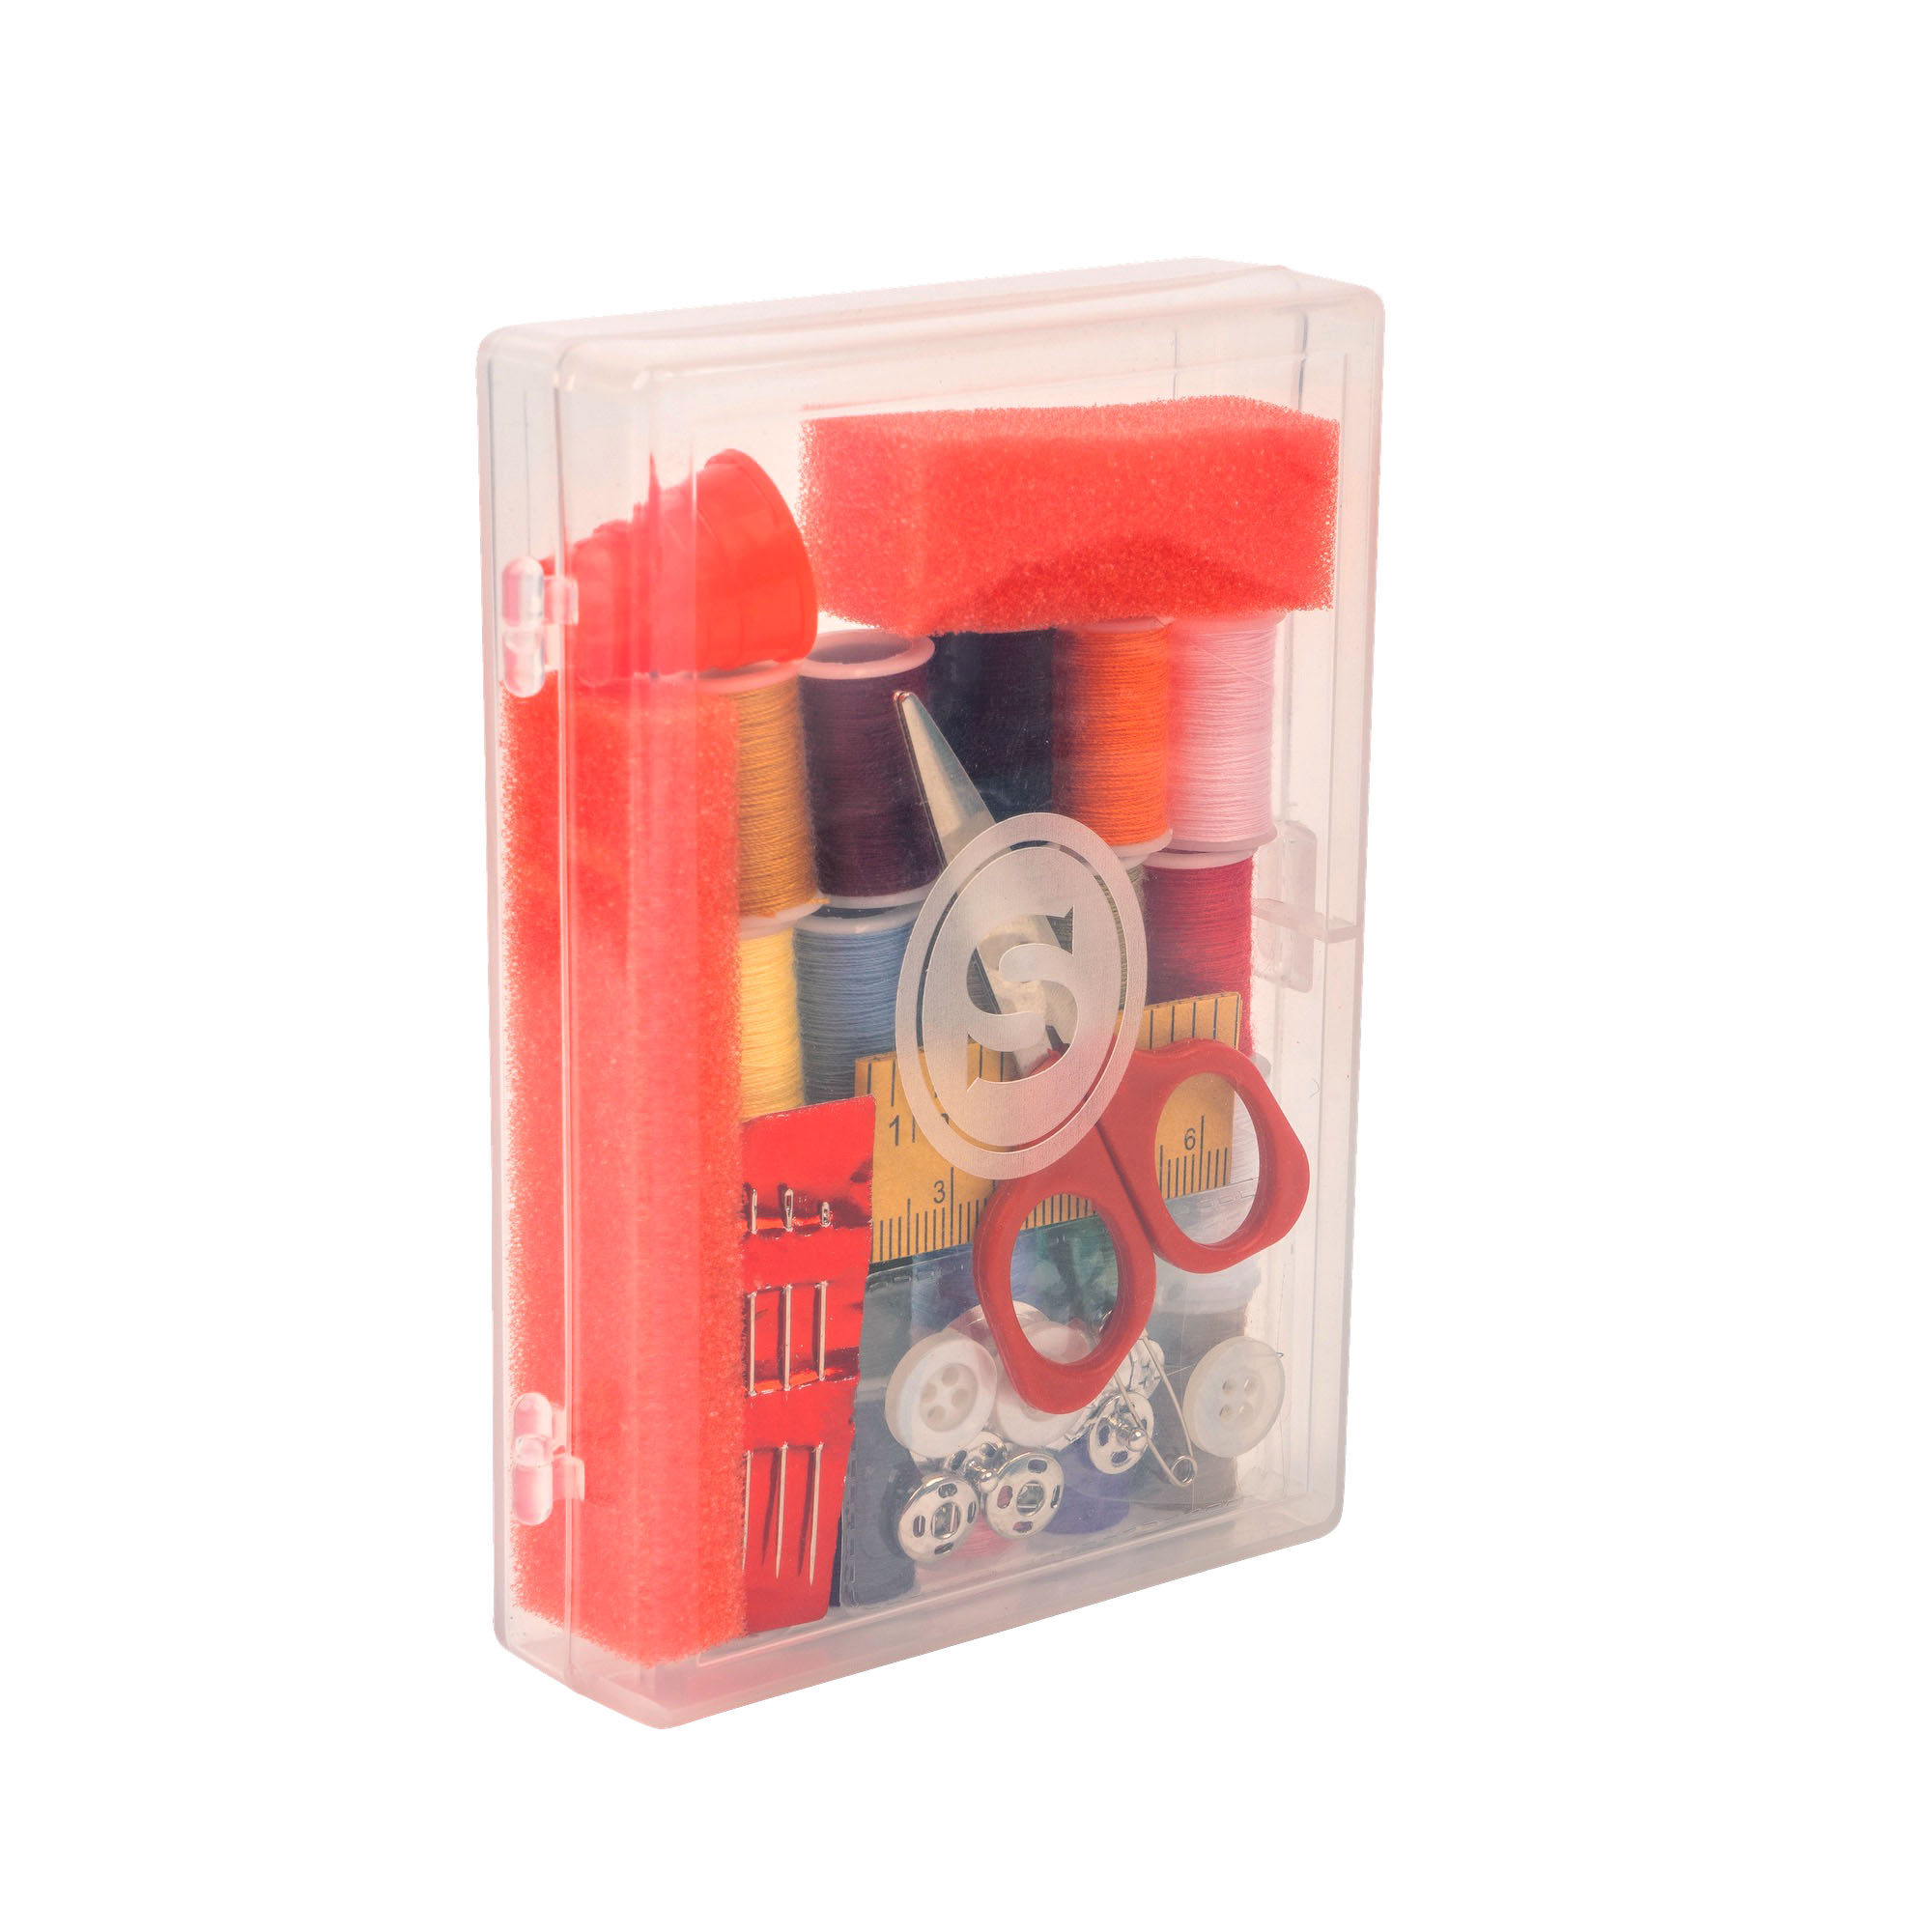 Deluxe Sewing Kit- - image 3 of 6